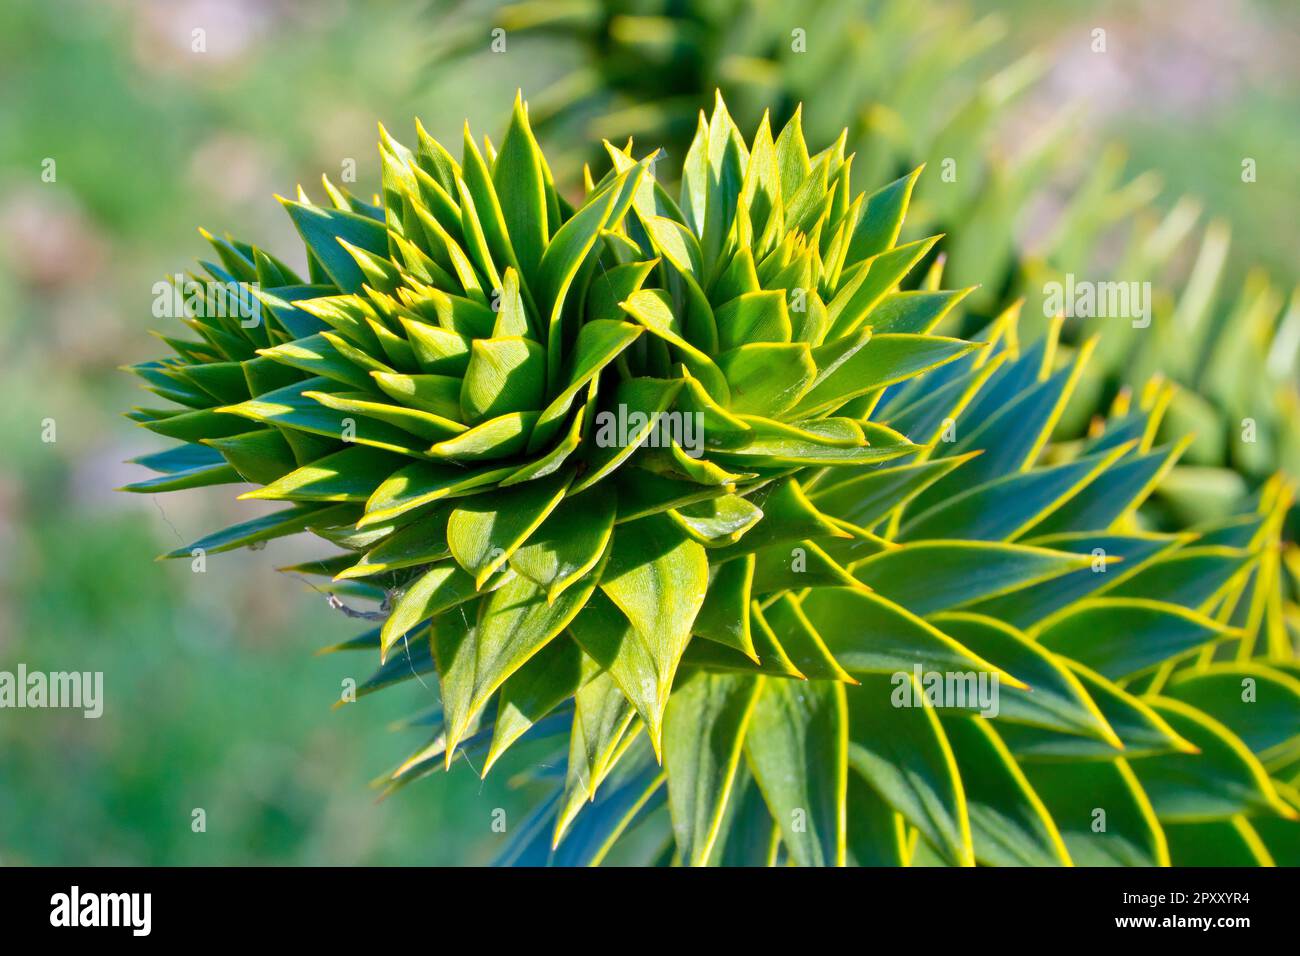 Monkey Puzzle or Chilean Pine (araucaria araucana), close up showing the end of a branch and the sharp spiky triangular leaves that cover it. Stock Photo